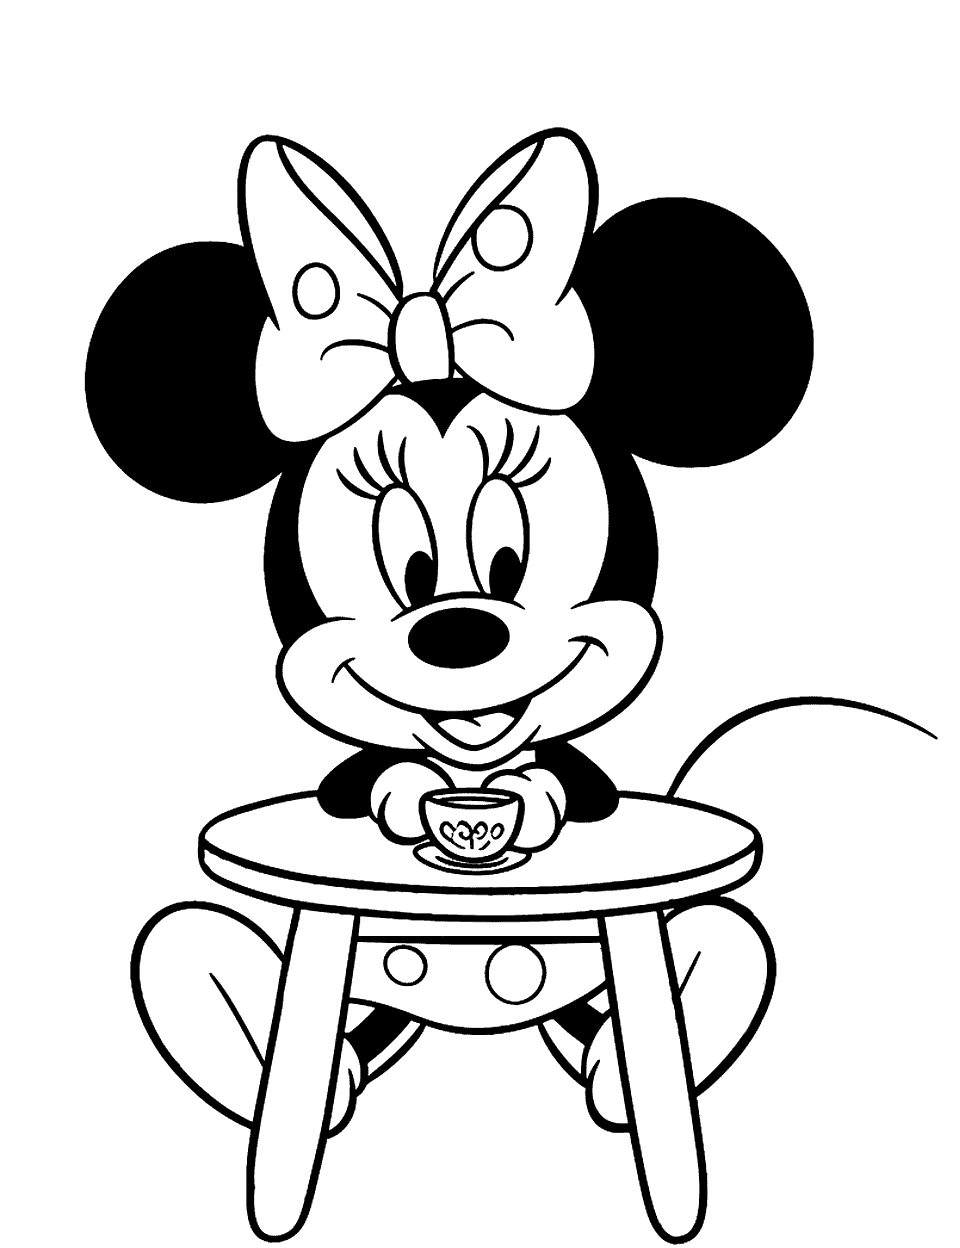 Minnie Mouse's Tea Party Toddler Coloring Page - Minnie Mouse sitting at a small table.